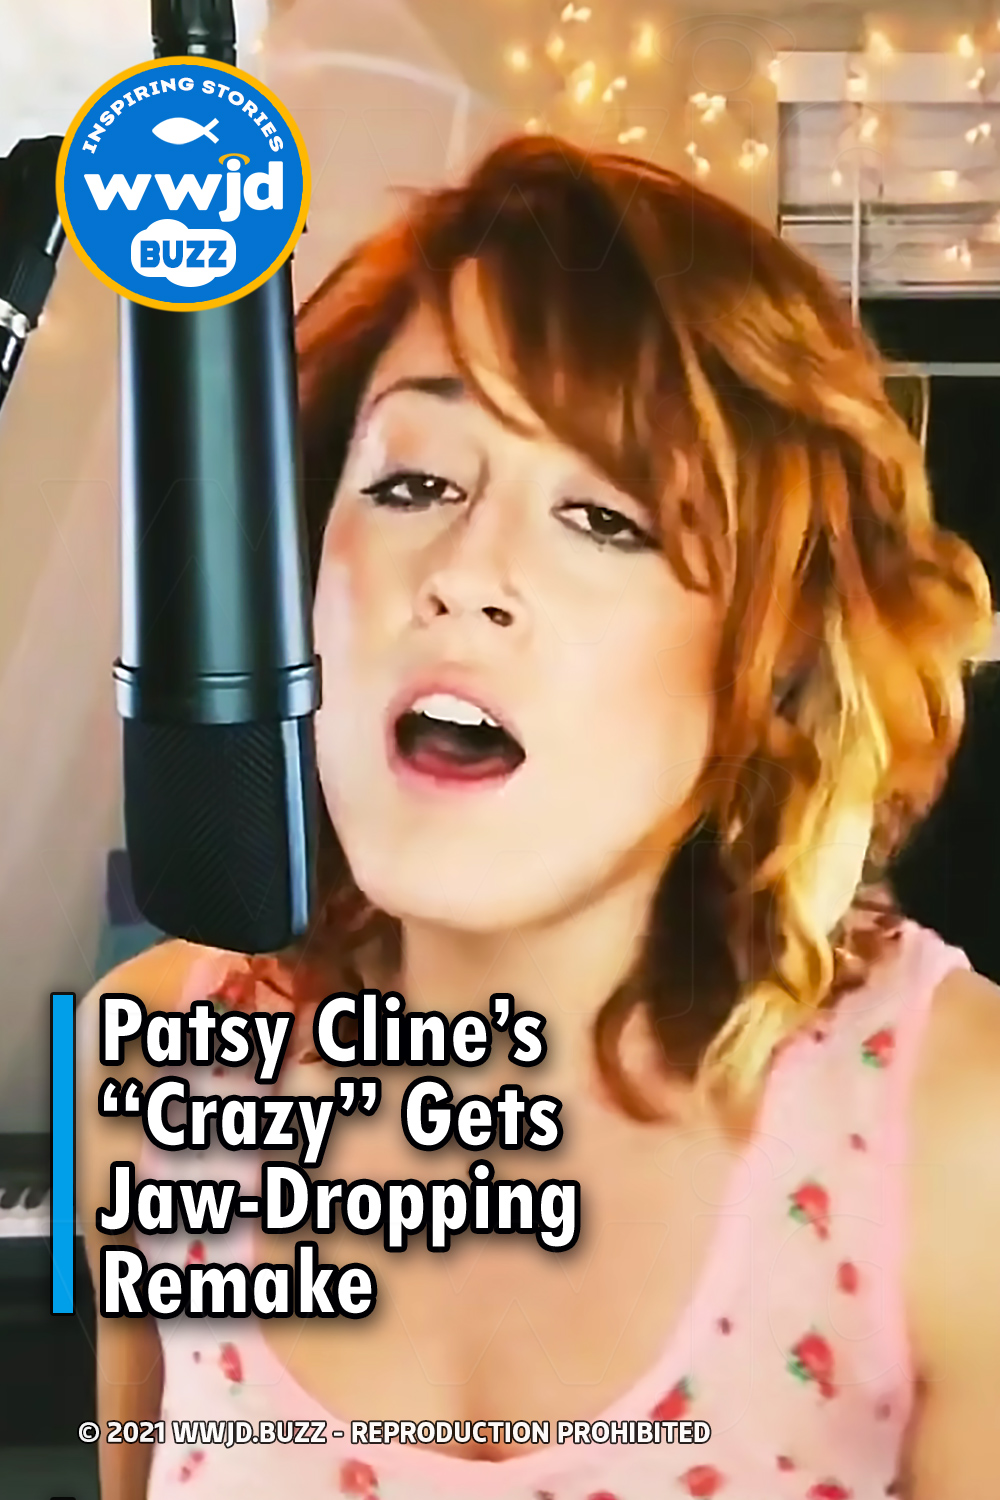 Patsy Cline’s “Crazy” Gets Jaw-Dropping Remake